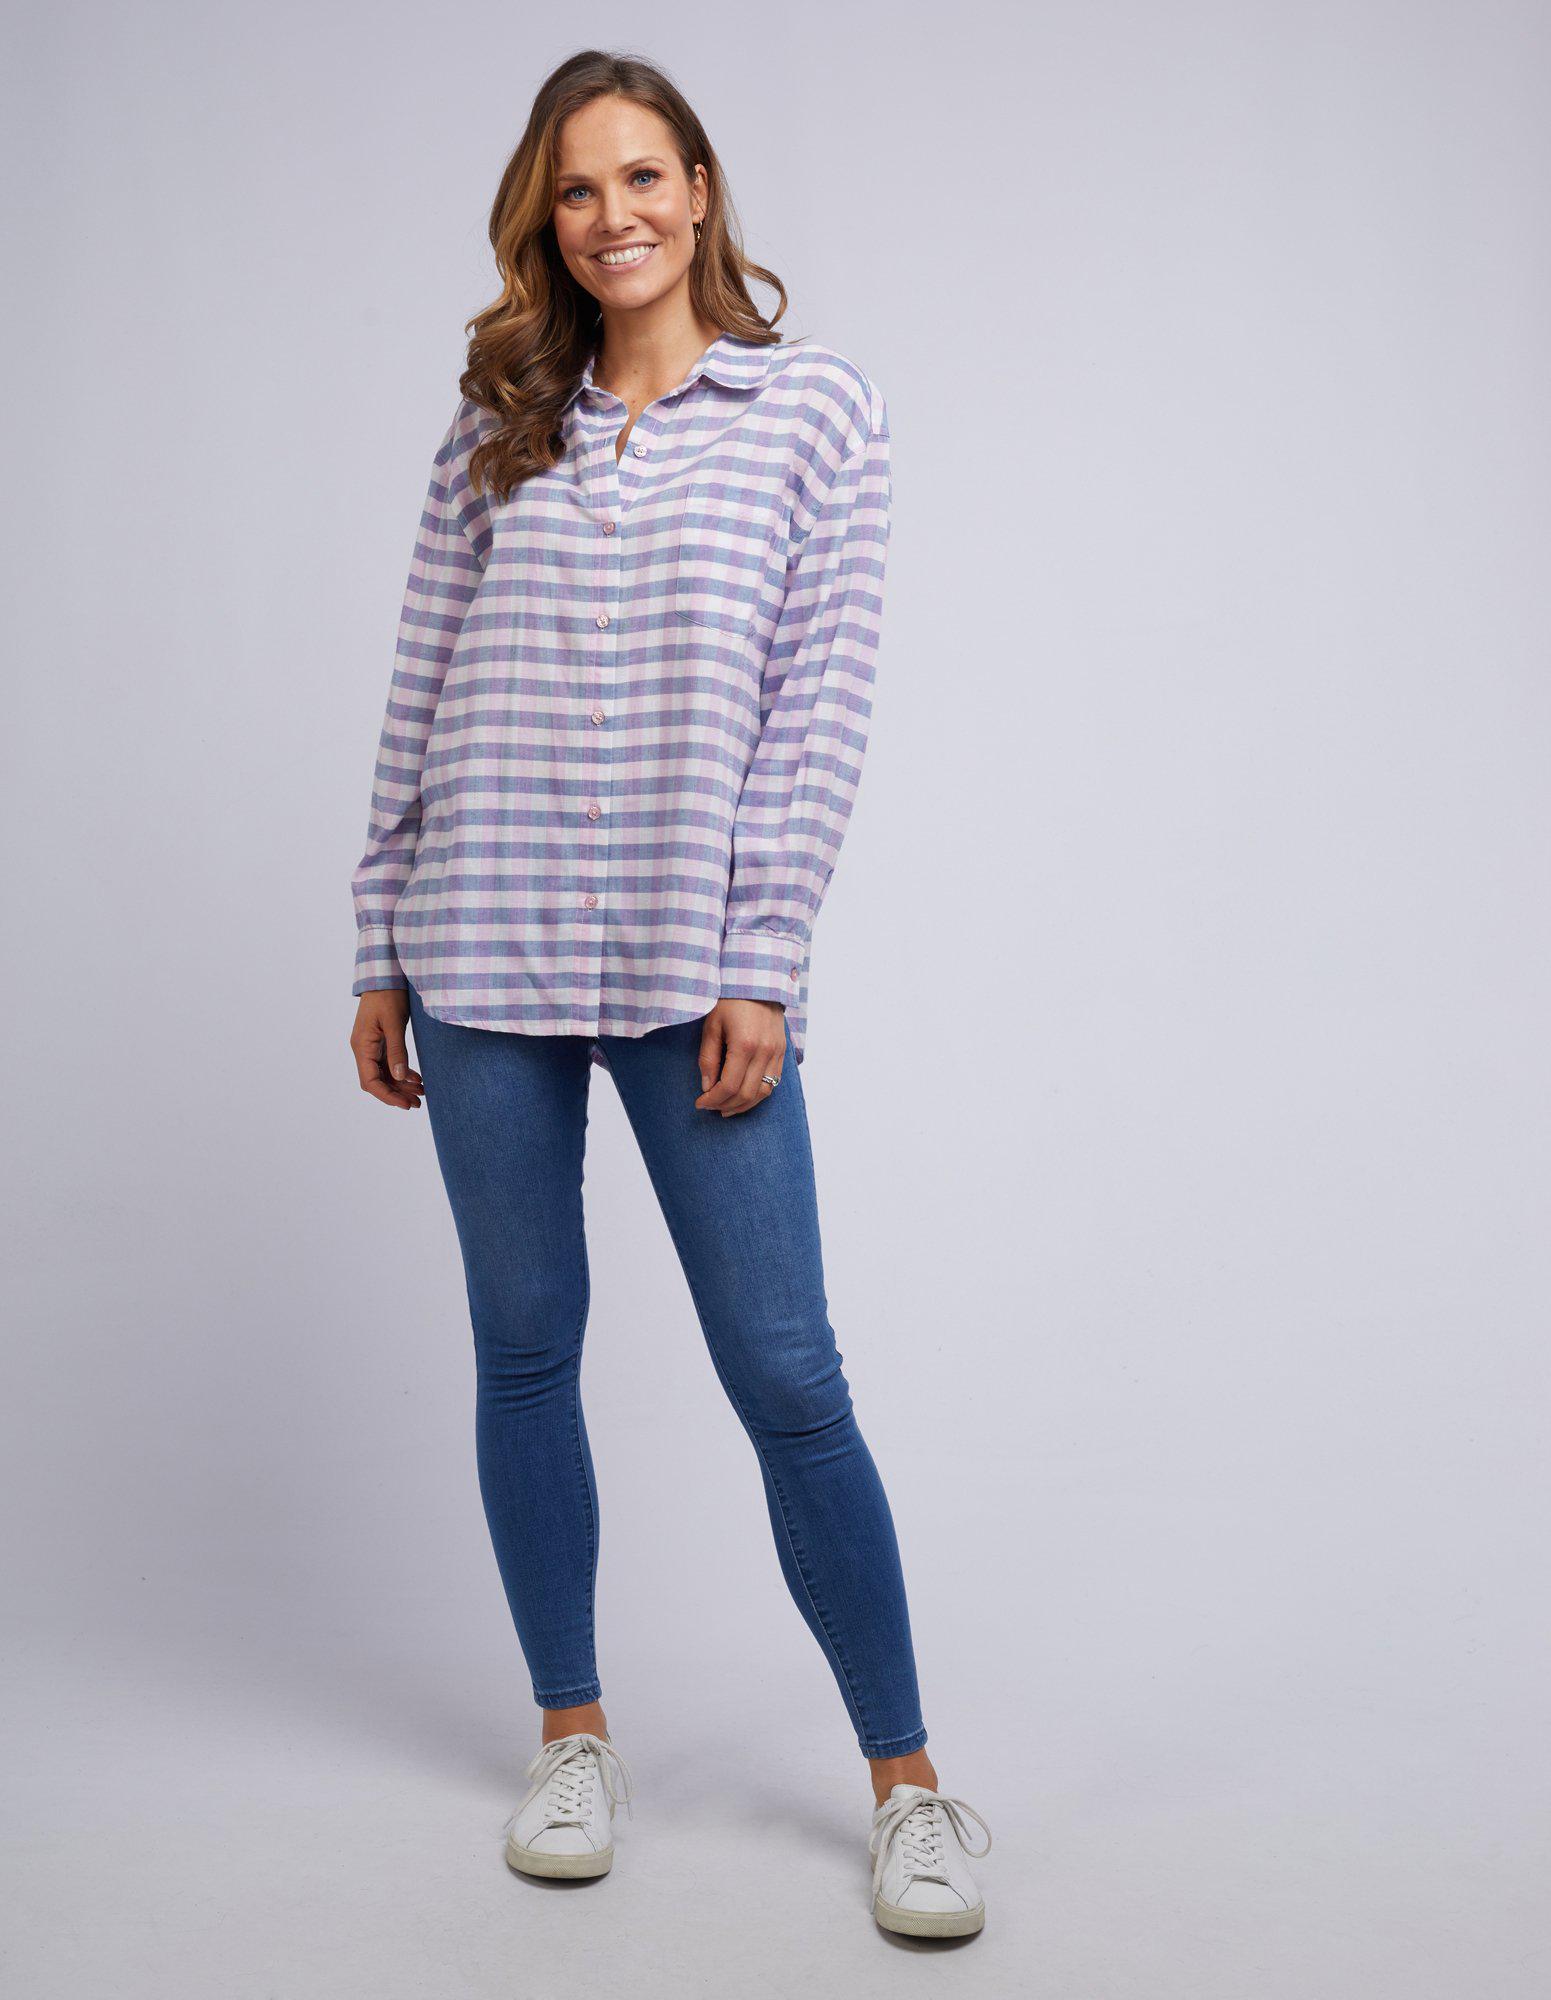 Gracie Gingham Shirt - Pink And Blue Check - Elm Lifestyle - FUDGE Gifts Home Lifestyle